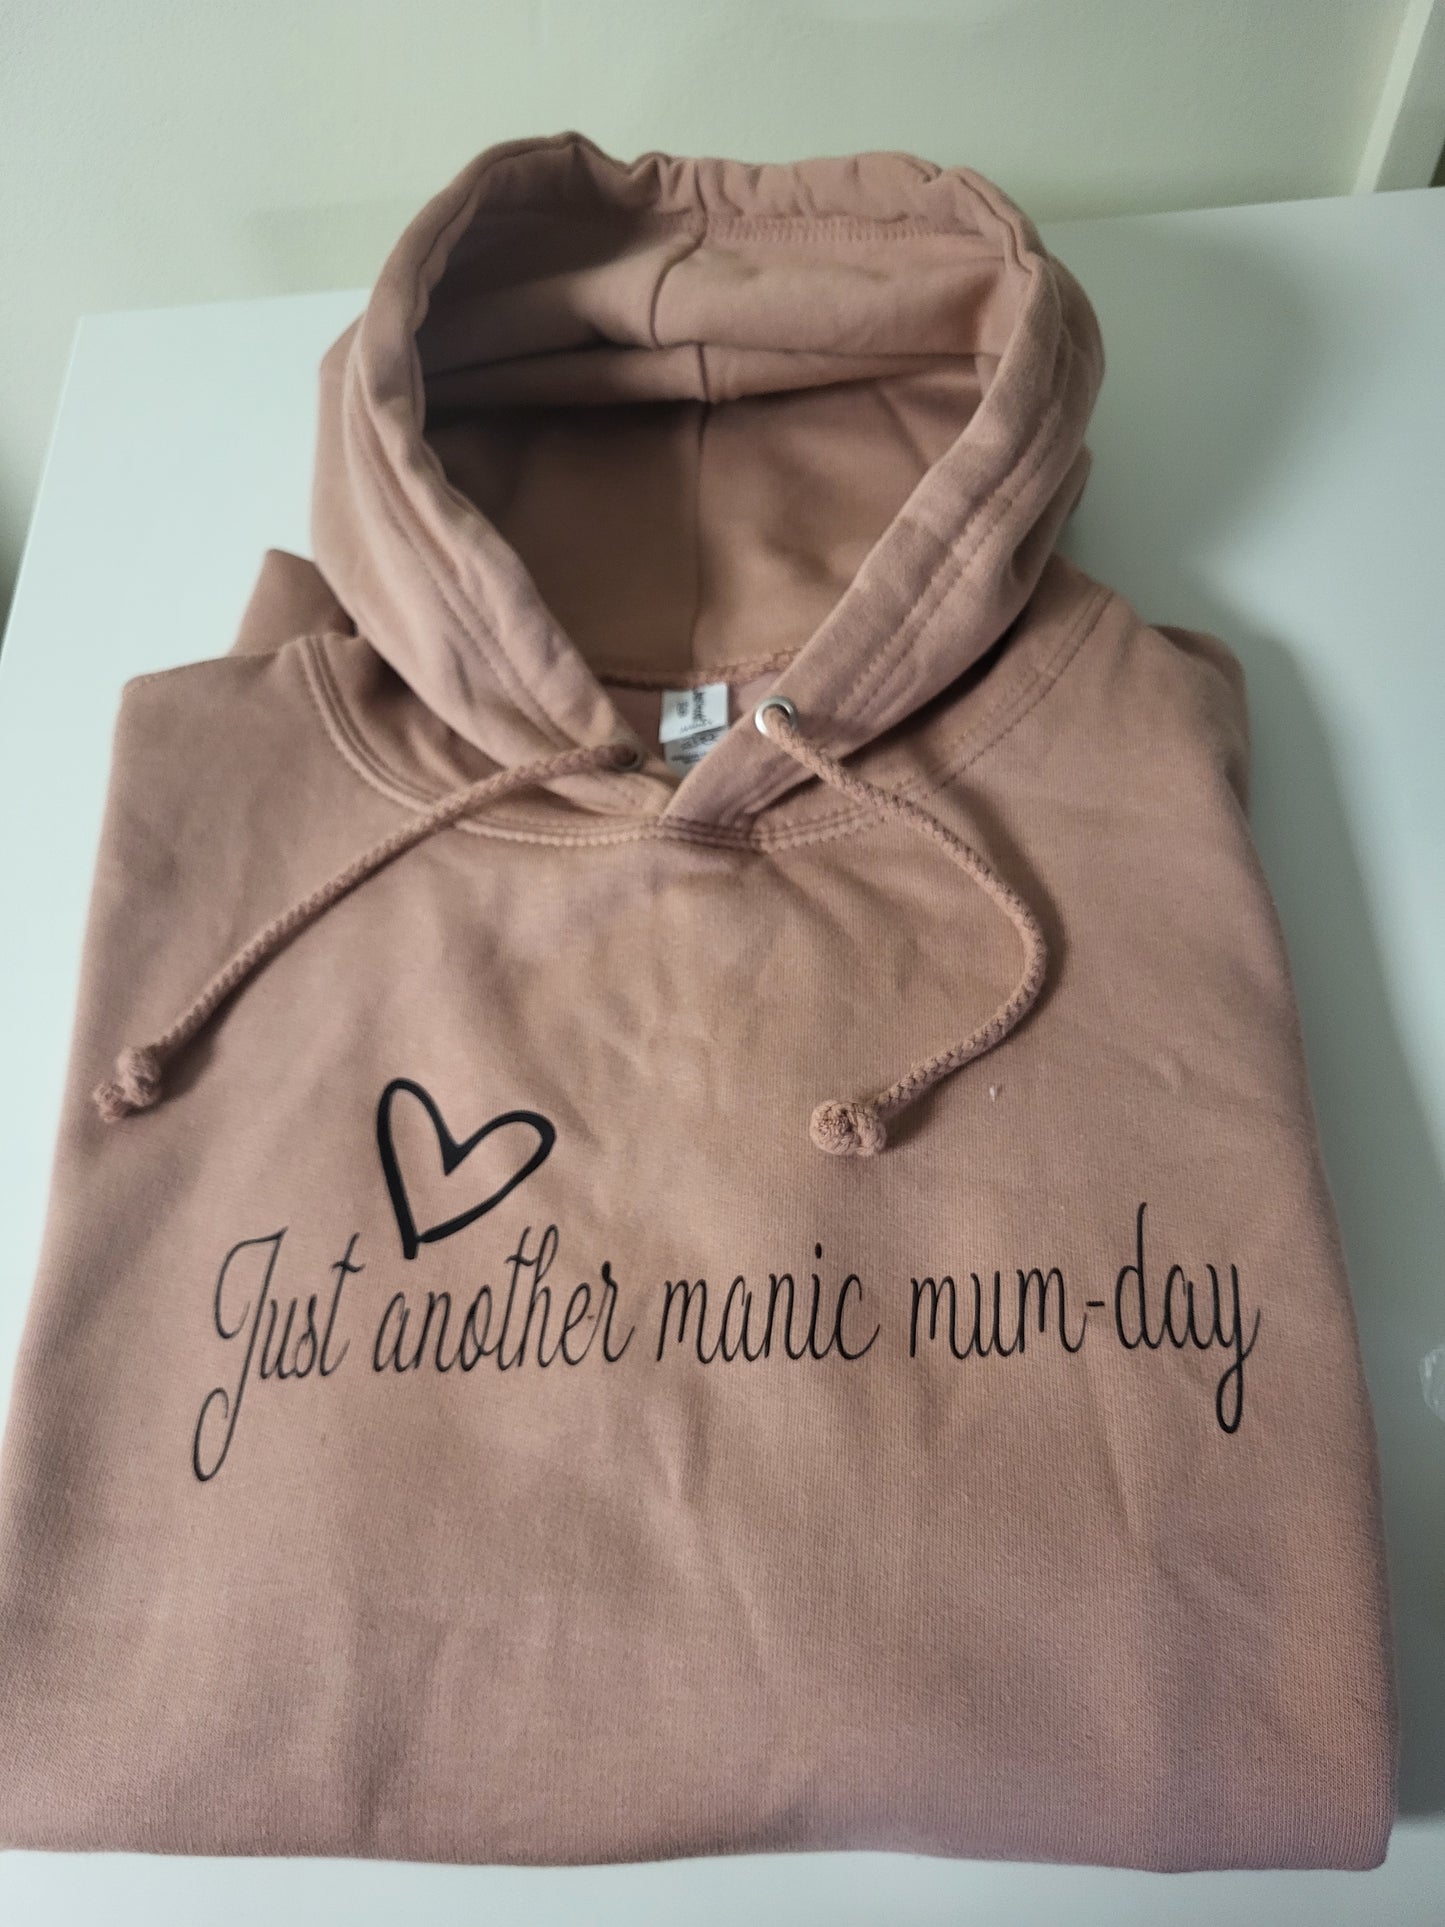 Just another manic mum day Hoody